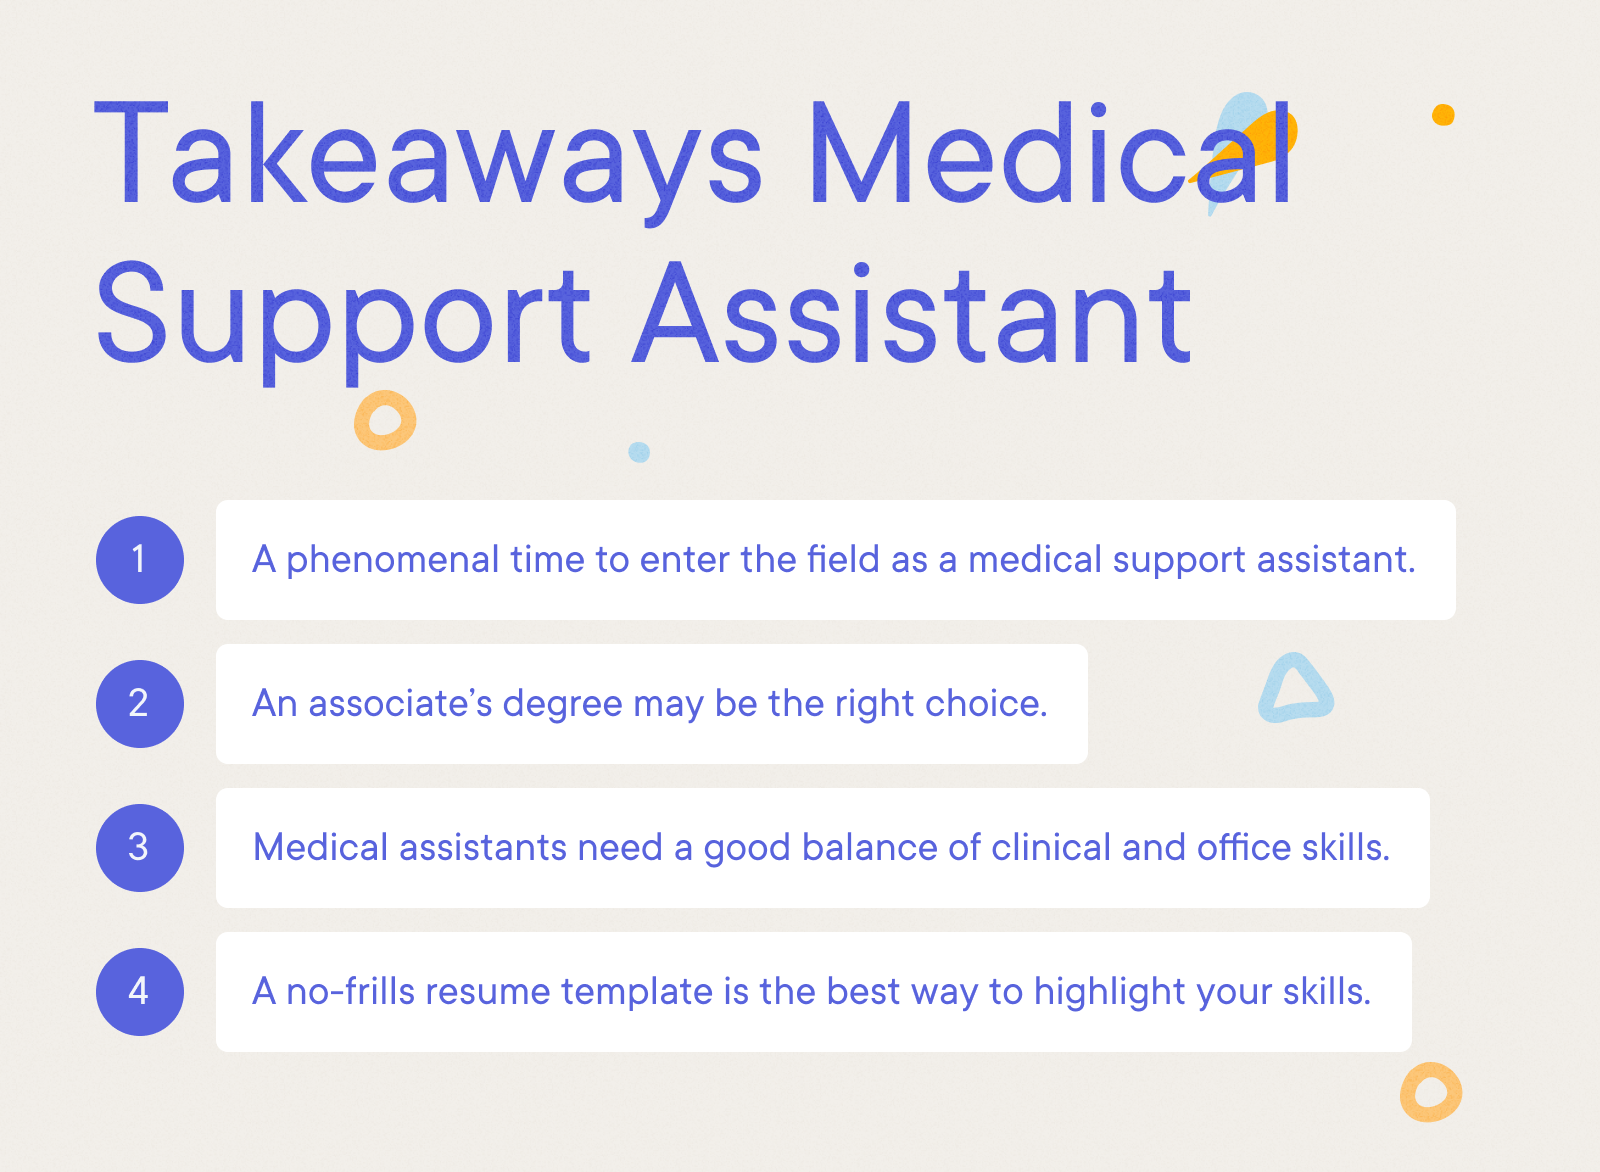 Medical Support Assistant - Takeaways Medical  Support Assistant